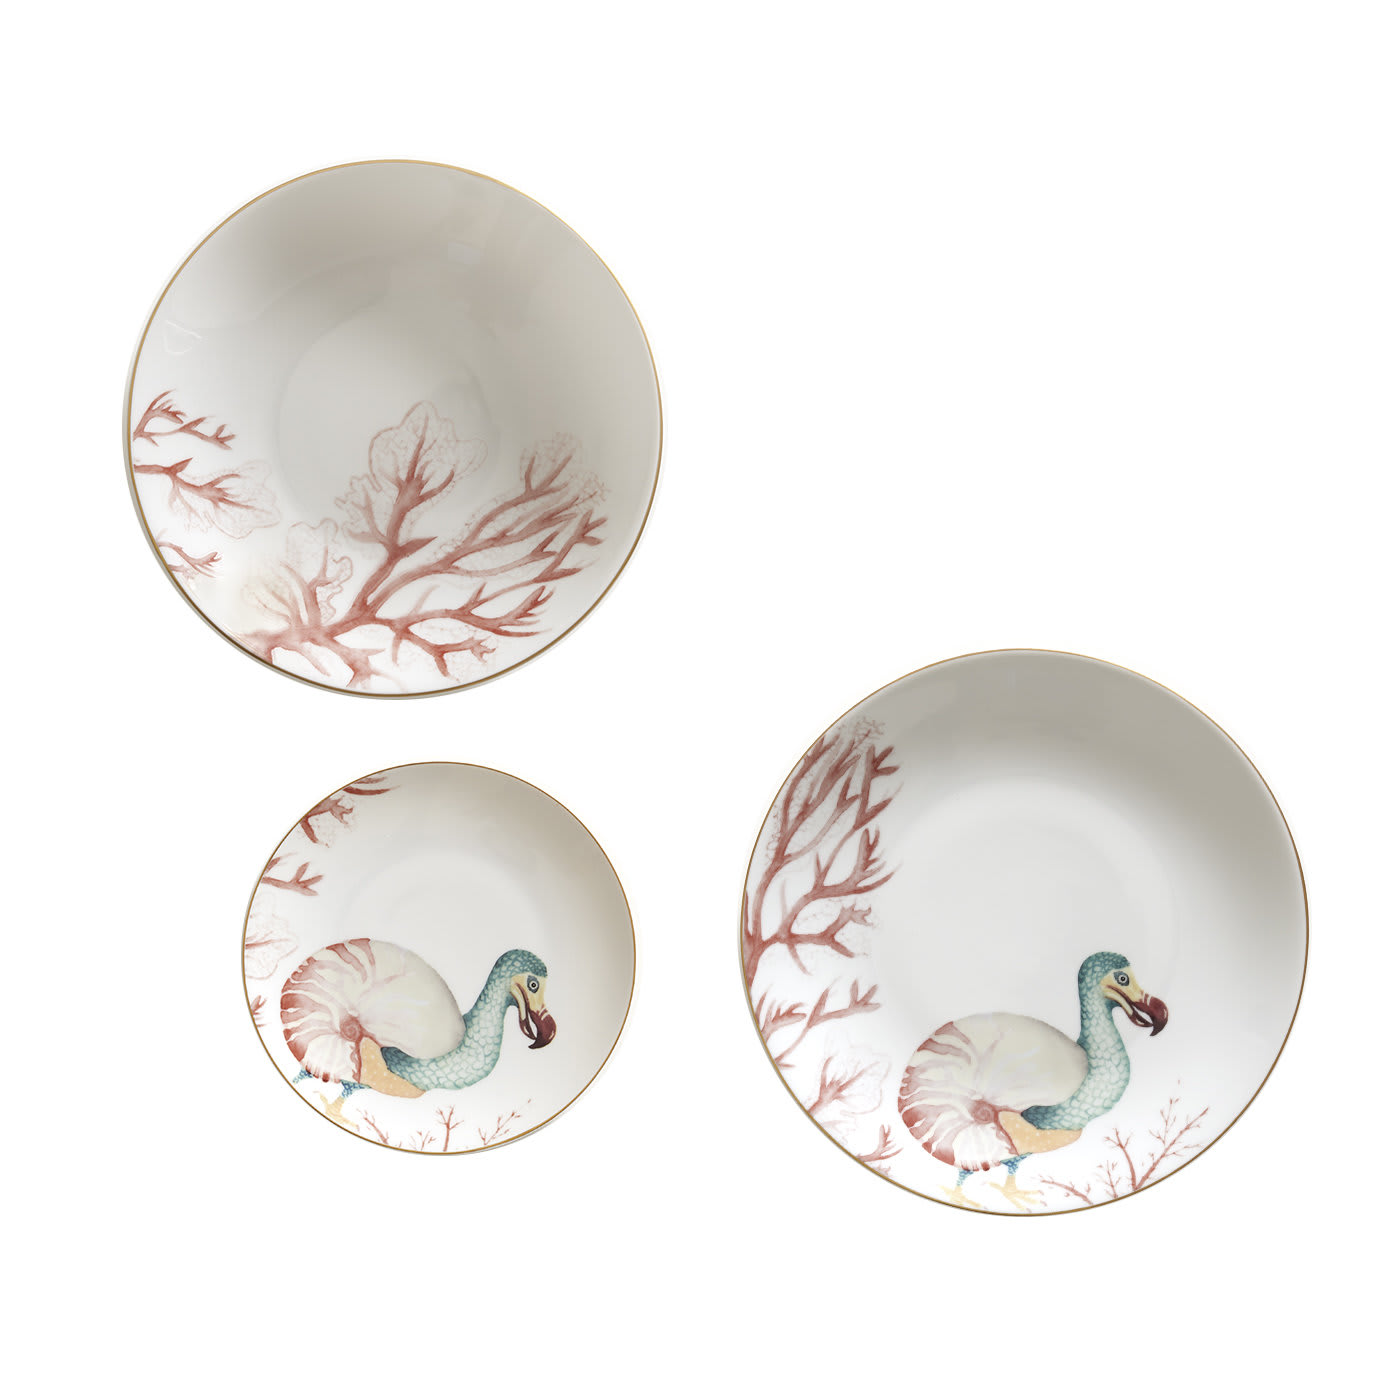 Dodilus Set of Three Porcelain Dishes - Dalwin Designs